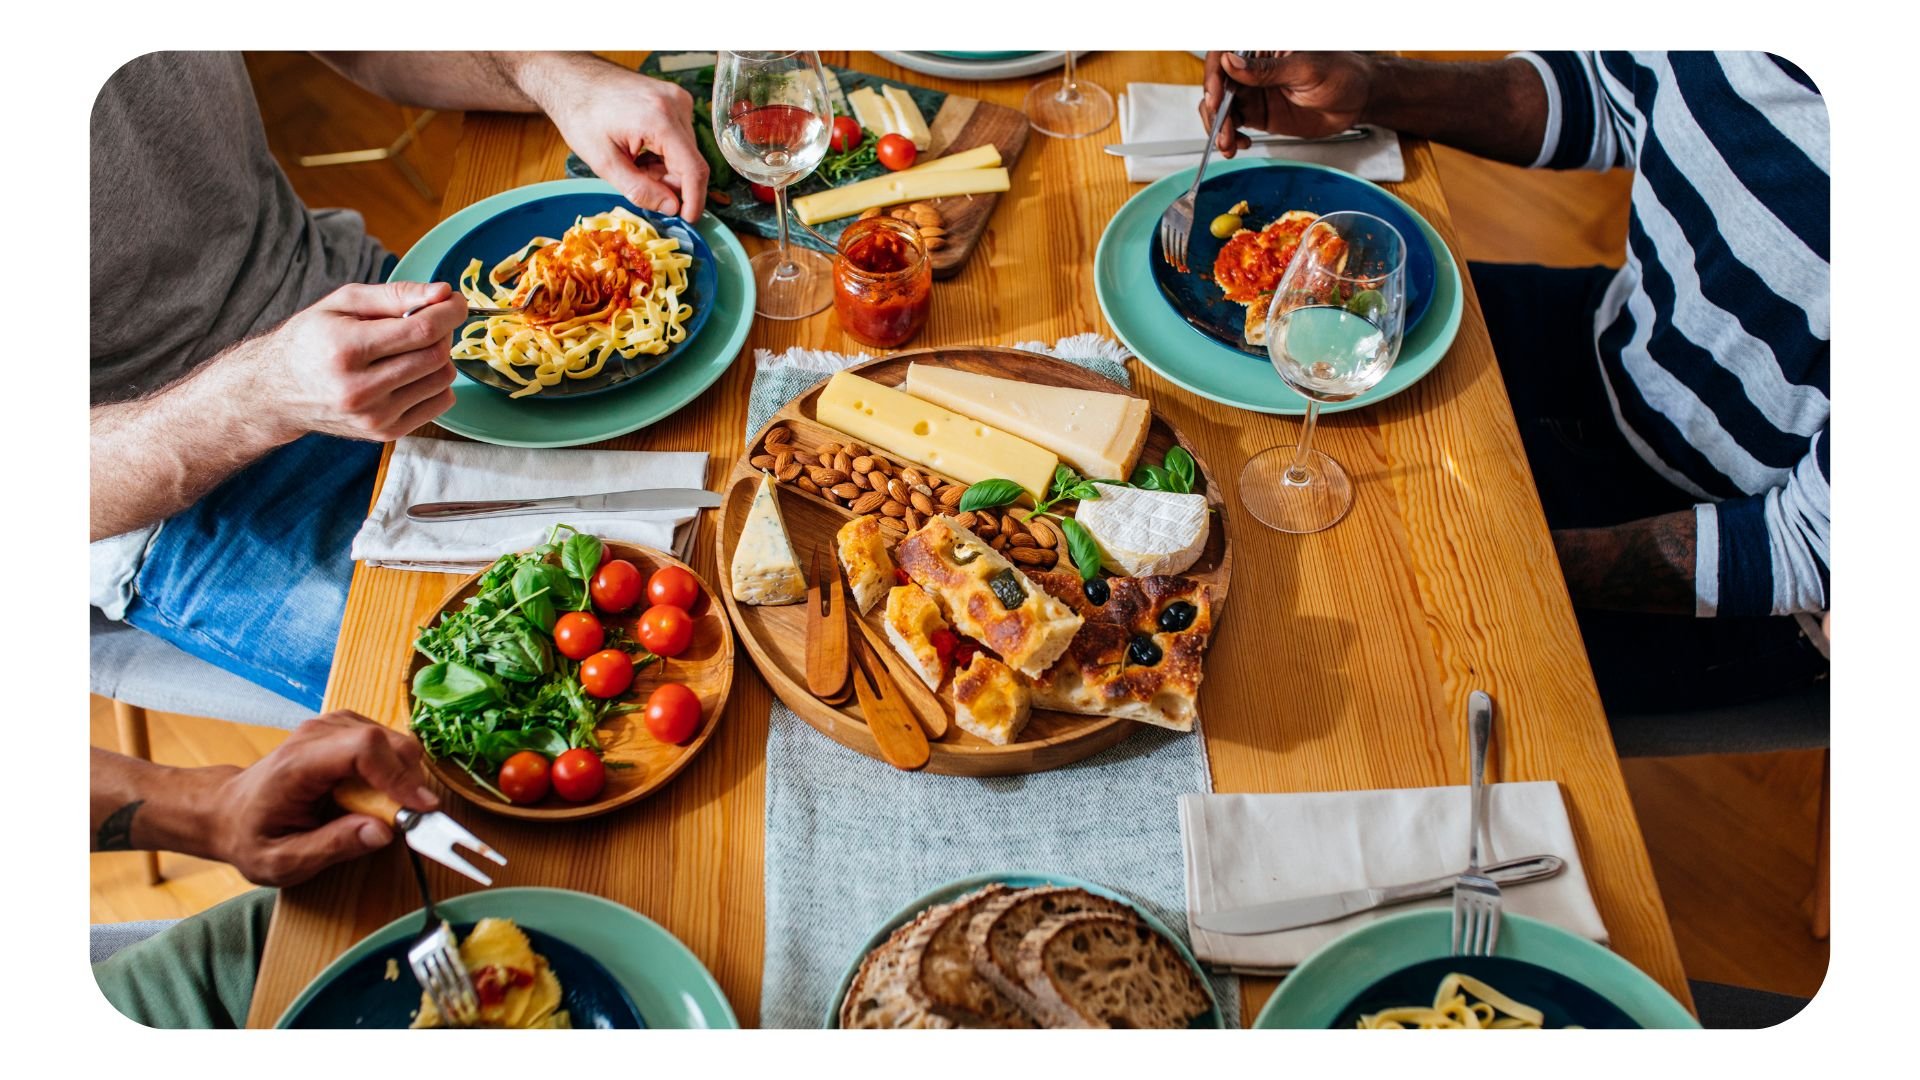 Overhead shot of people eating in a restaurant with various Italian dishes laid on the table